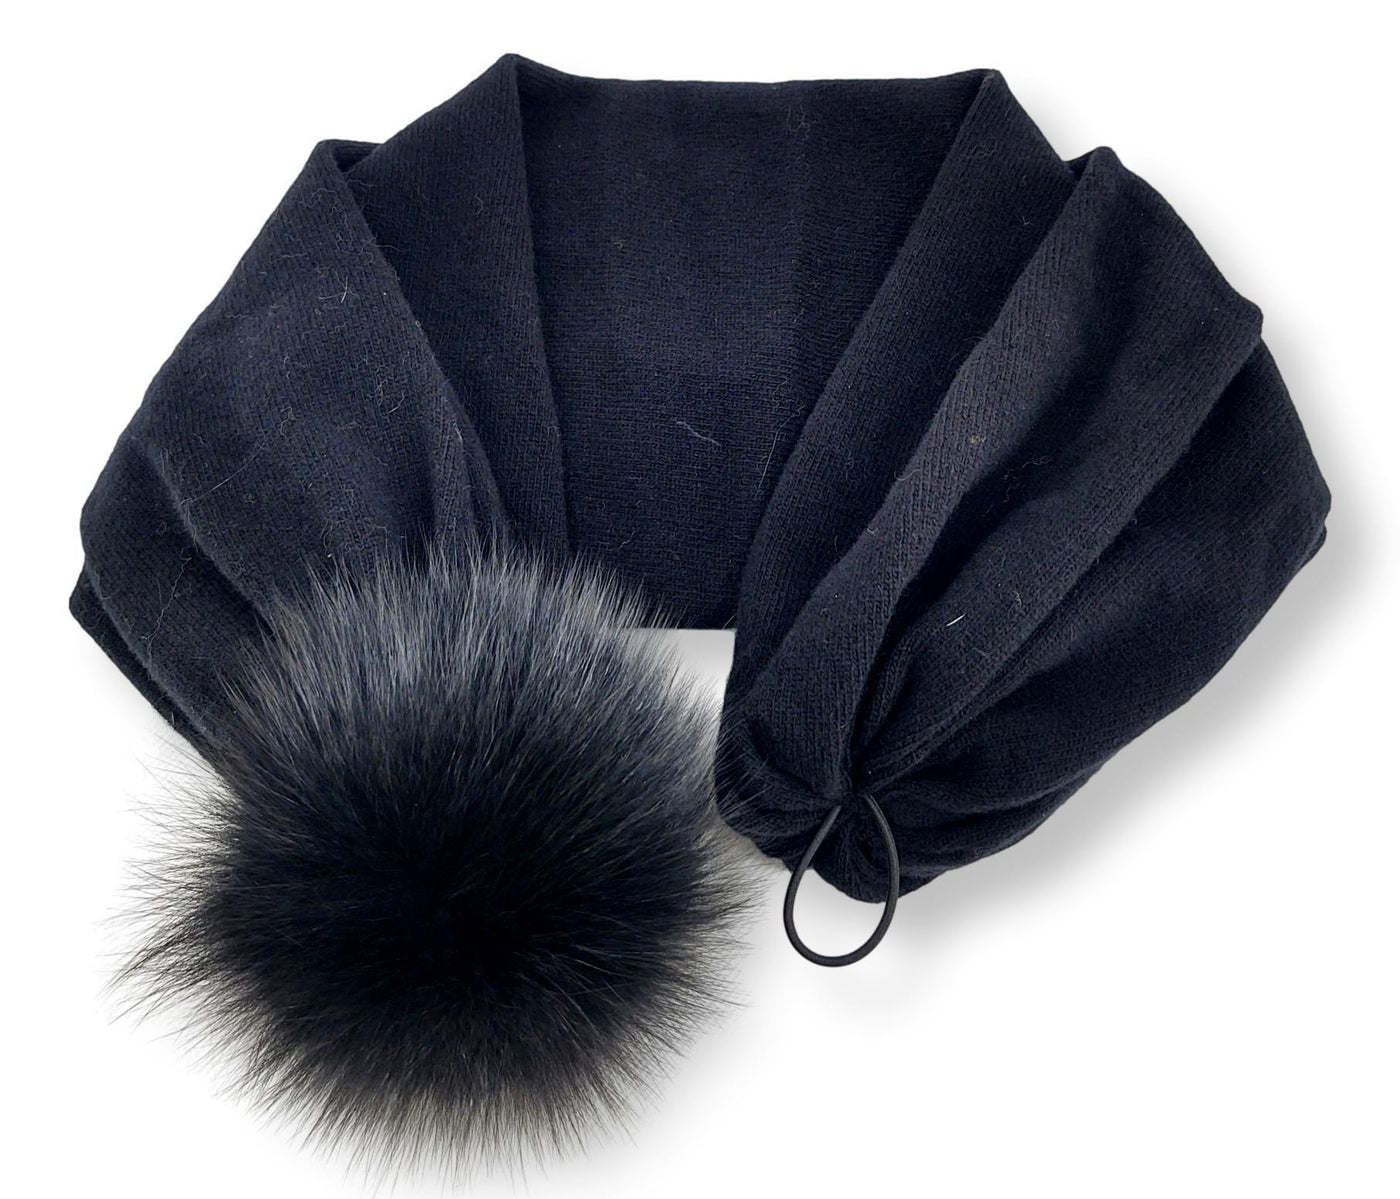 Jersey Beany Hat / Shawl - Accesories - Black - Accesories - Jersey Beany Hat / Shawl - Accesories - Black - Stampe Pels